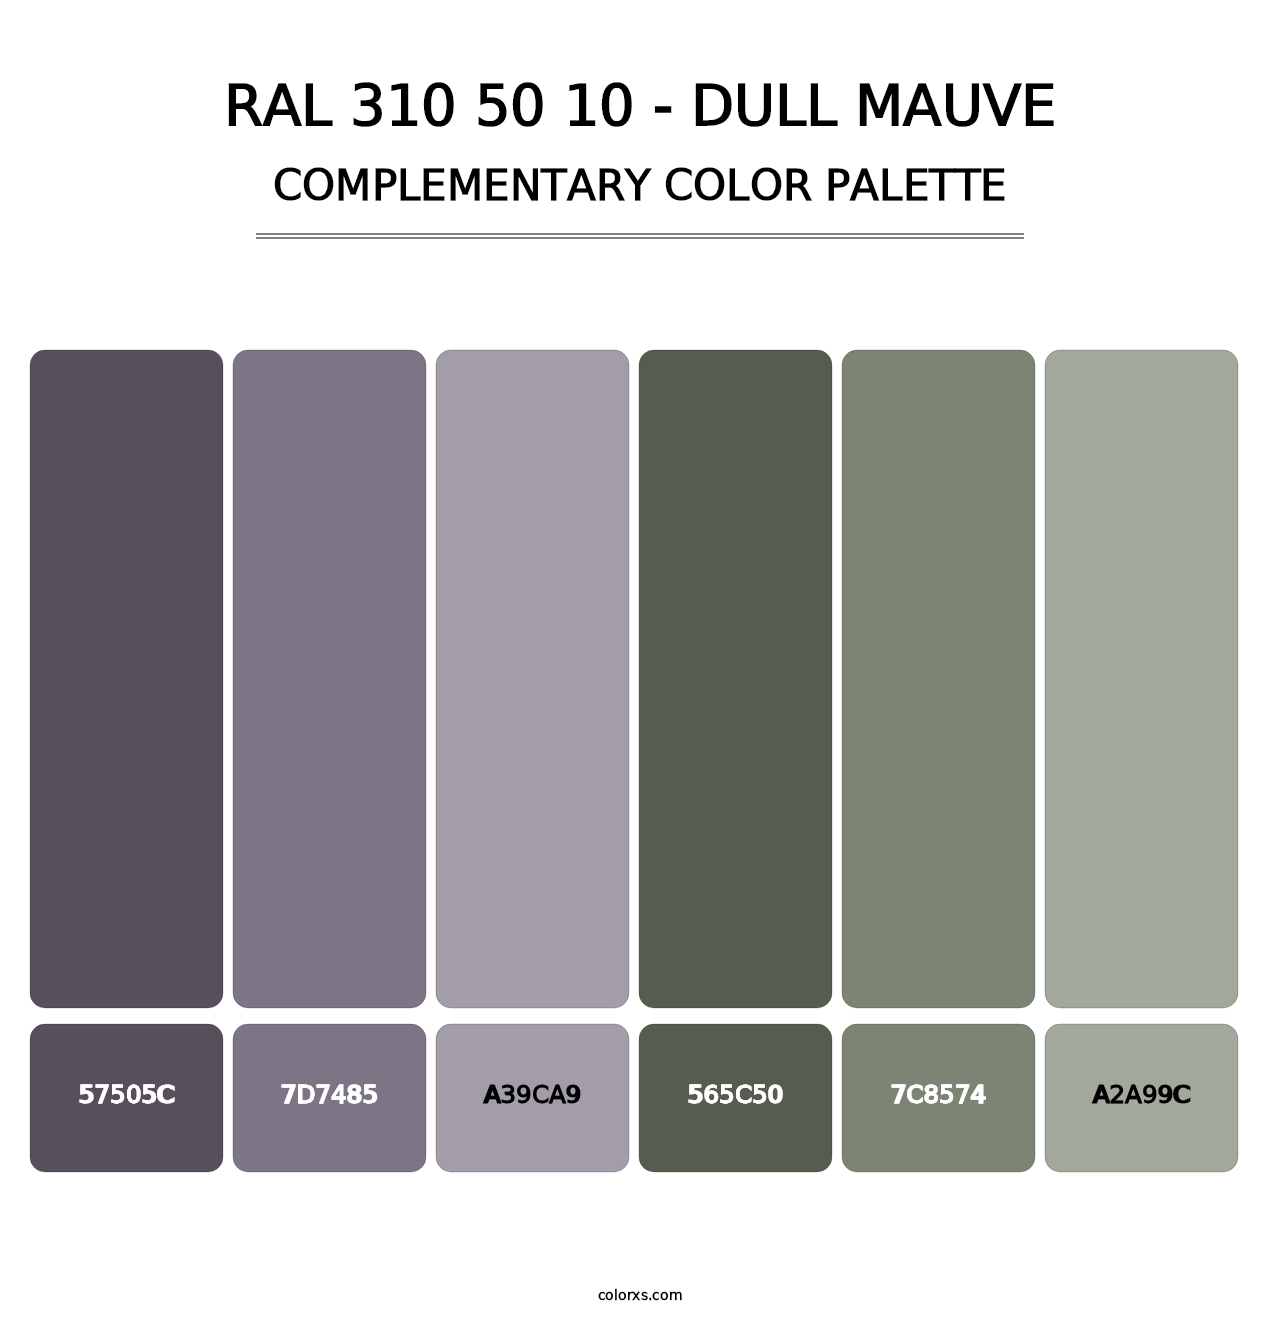 RAL 310 50 10 - Dull Mauve - Complementary Color Palette